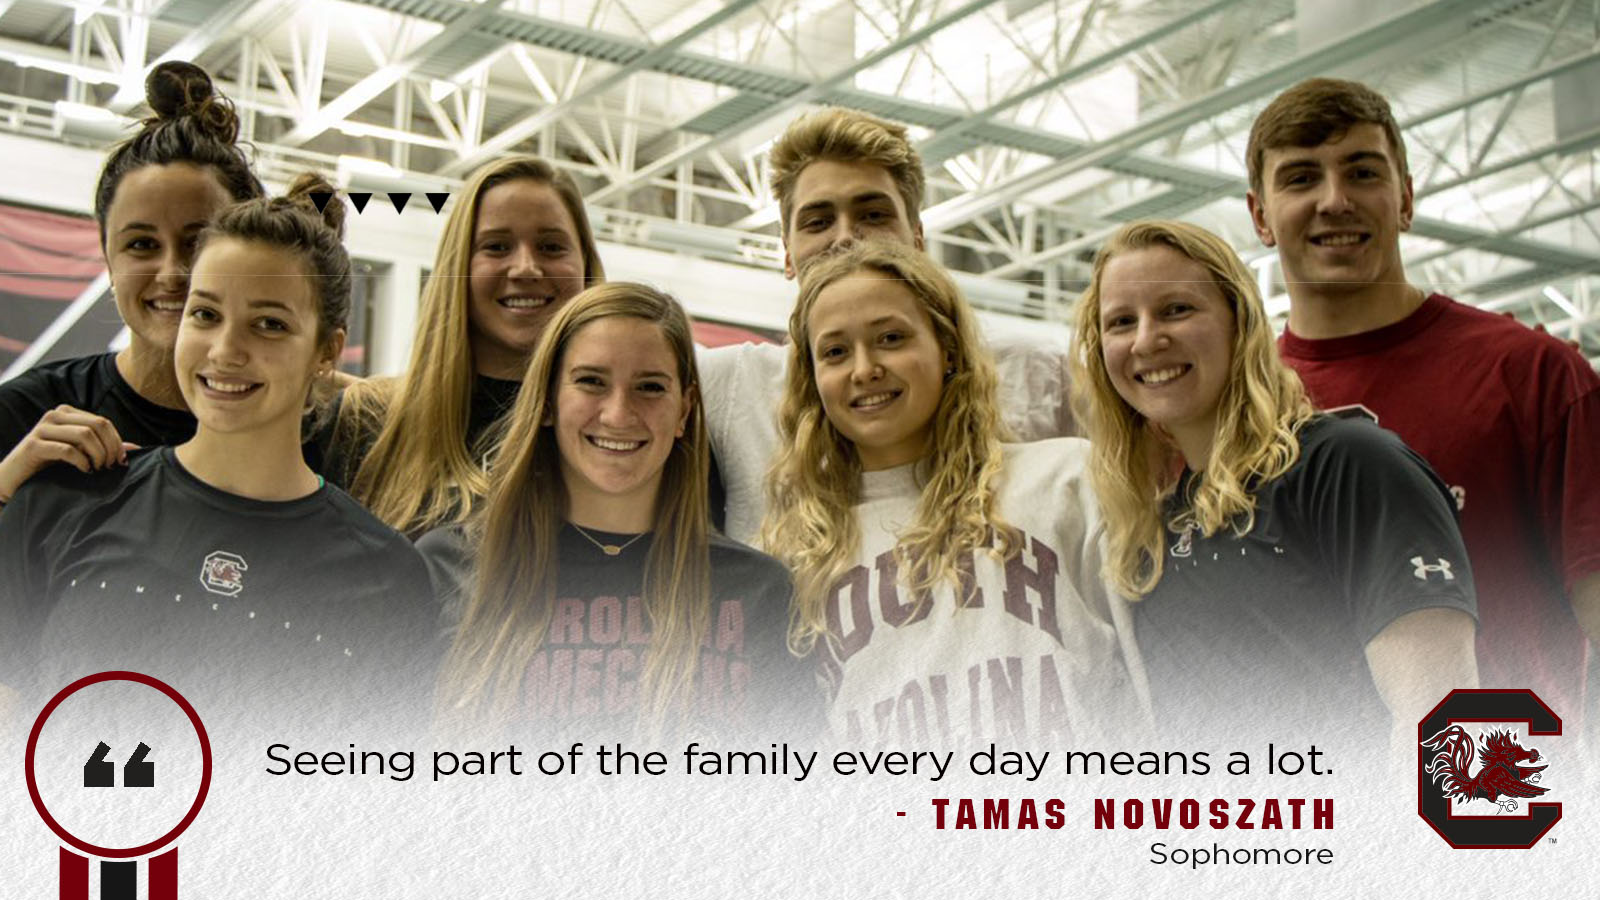 Swimming & Diving Team Takes Family Atmosphere to a New Level